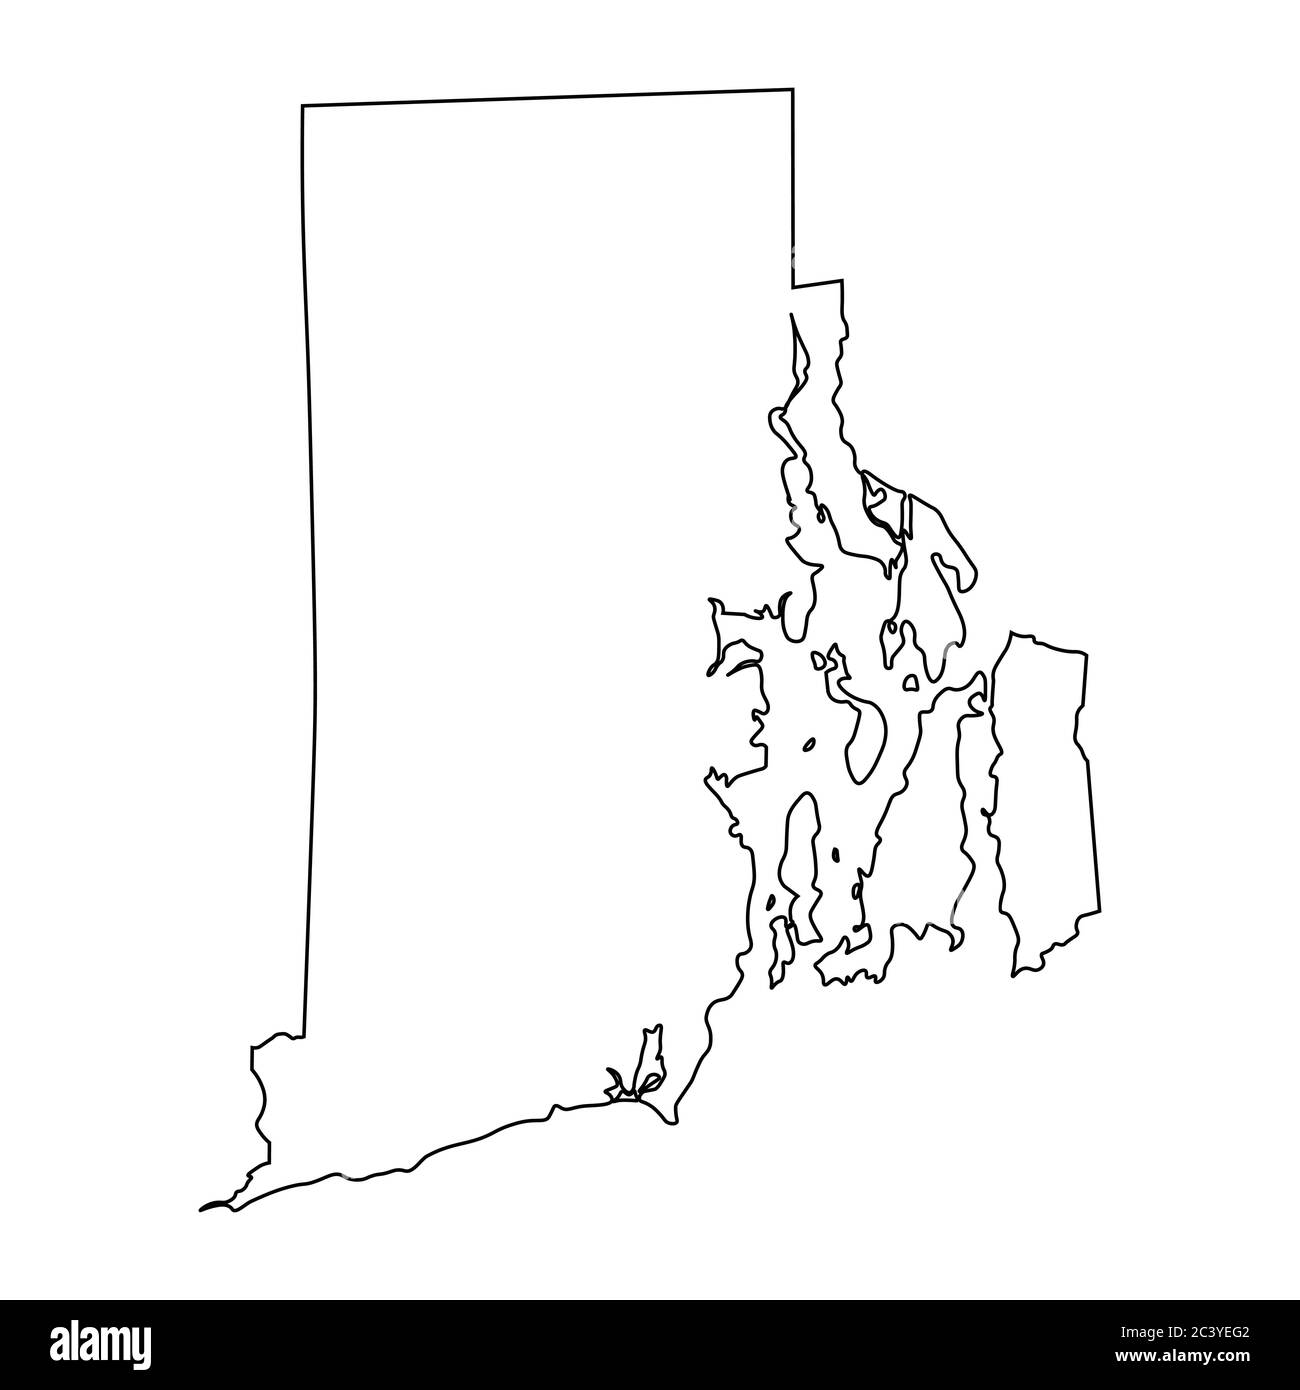 Rhode Island RI state Maps. Black outline map isolated on a white background. EPS Vector Stock Vector